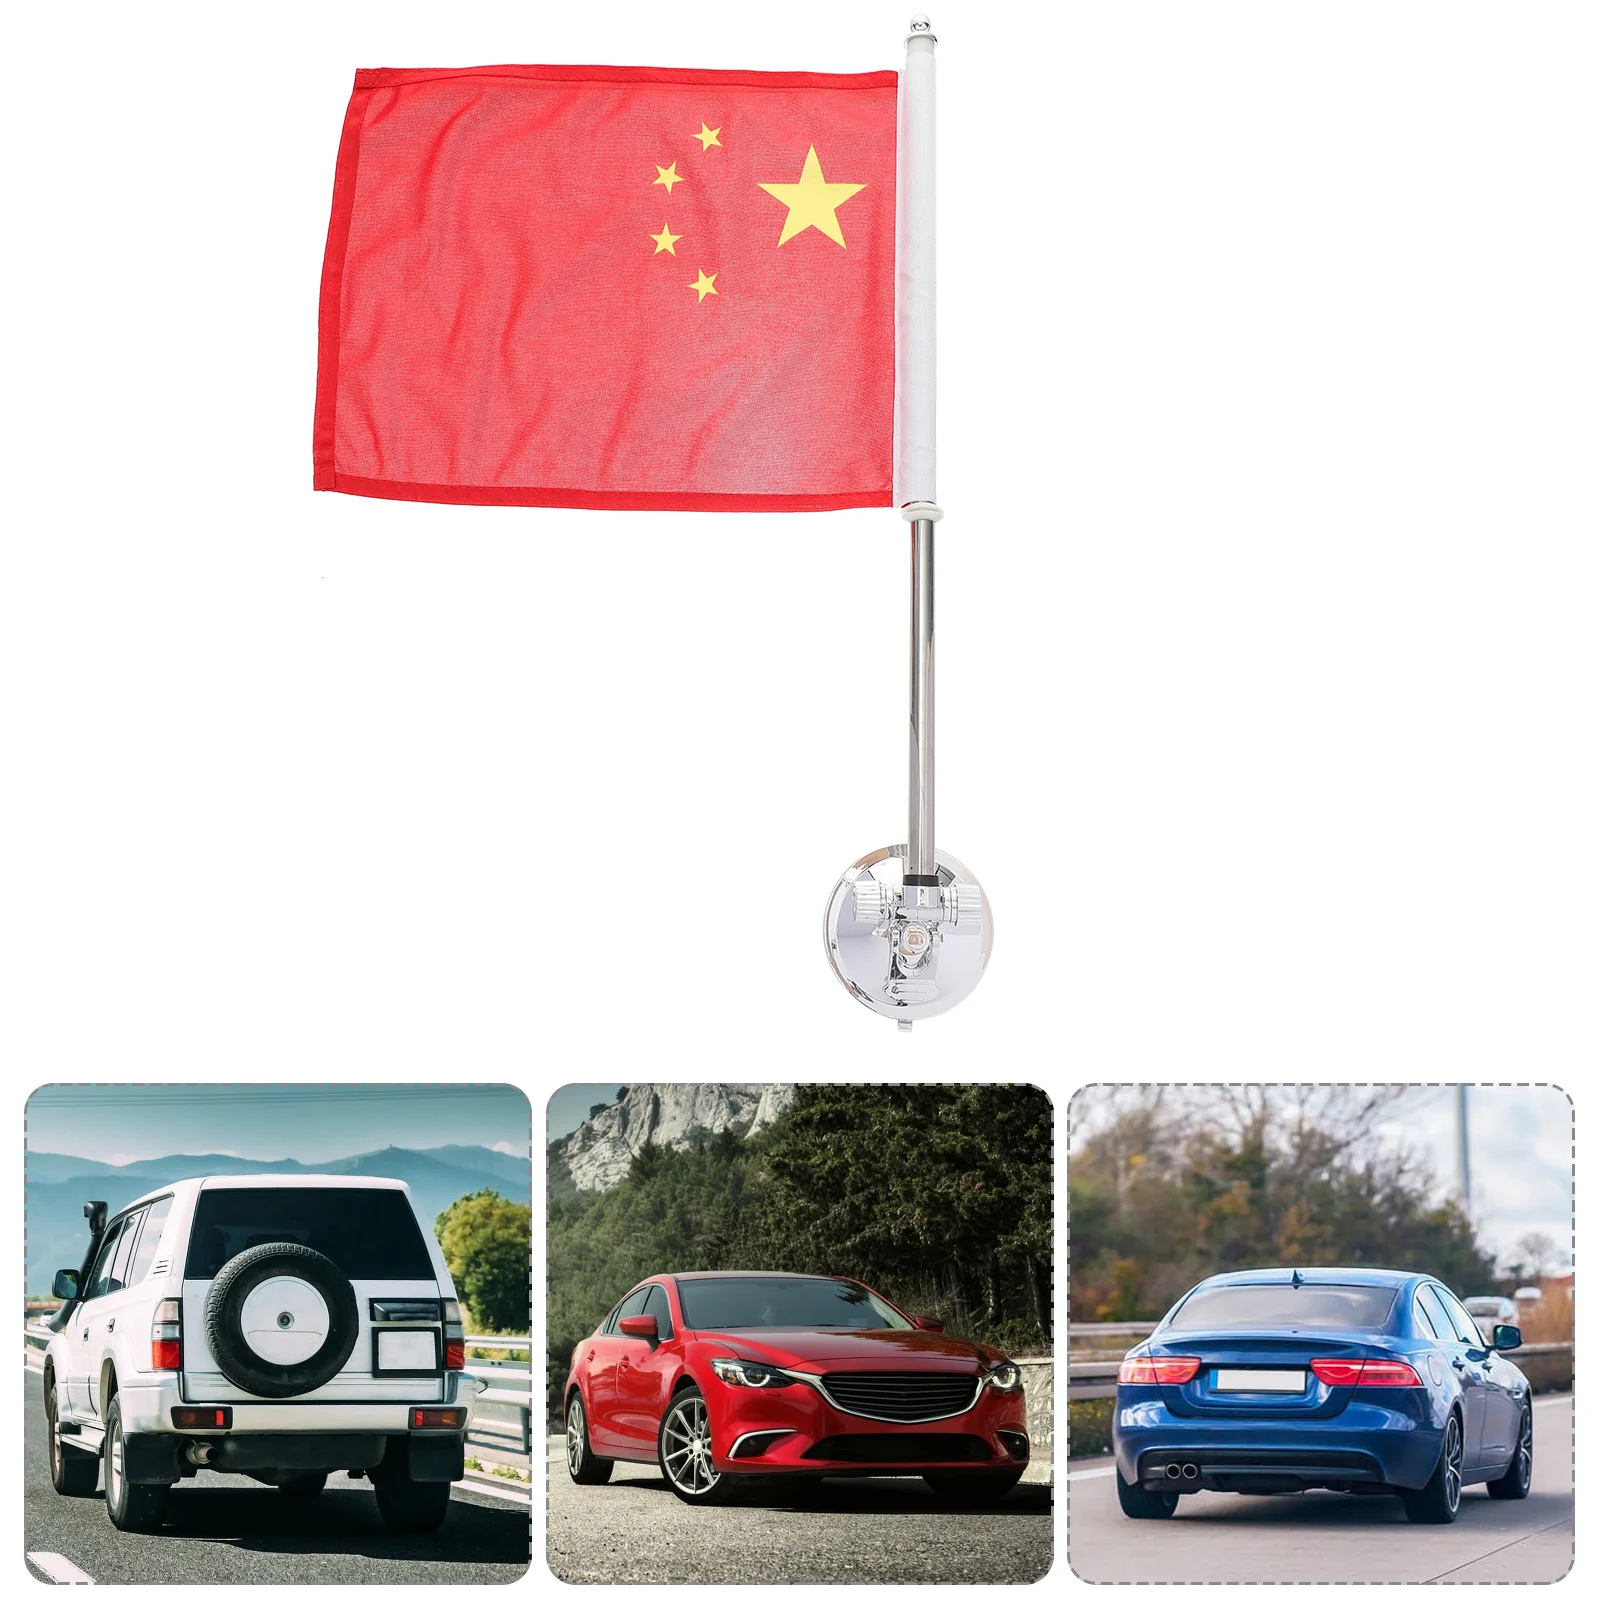 Flag Pole Holder Car Window Bracket Flagpole For Kit Mount Clip Suction House Universal Cup Poles Mounting Flags Patriotic